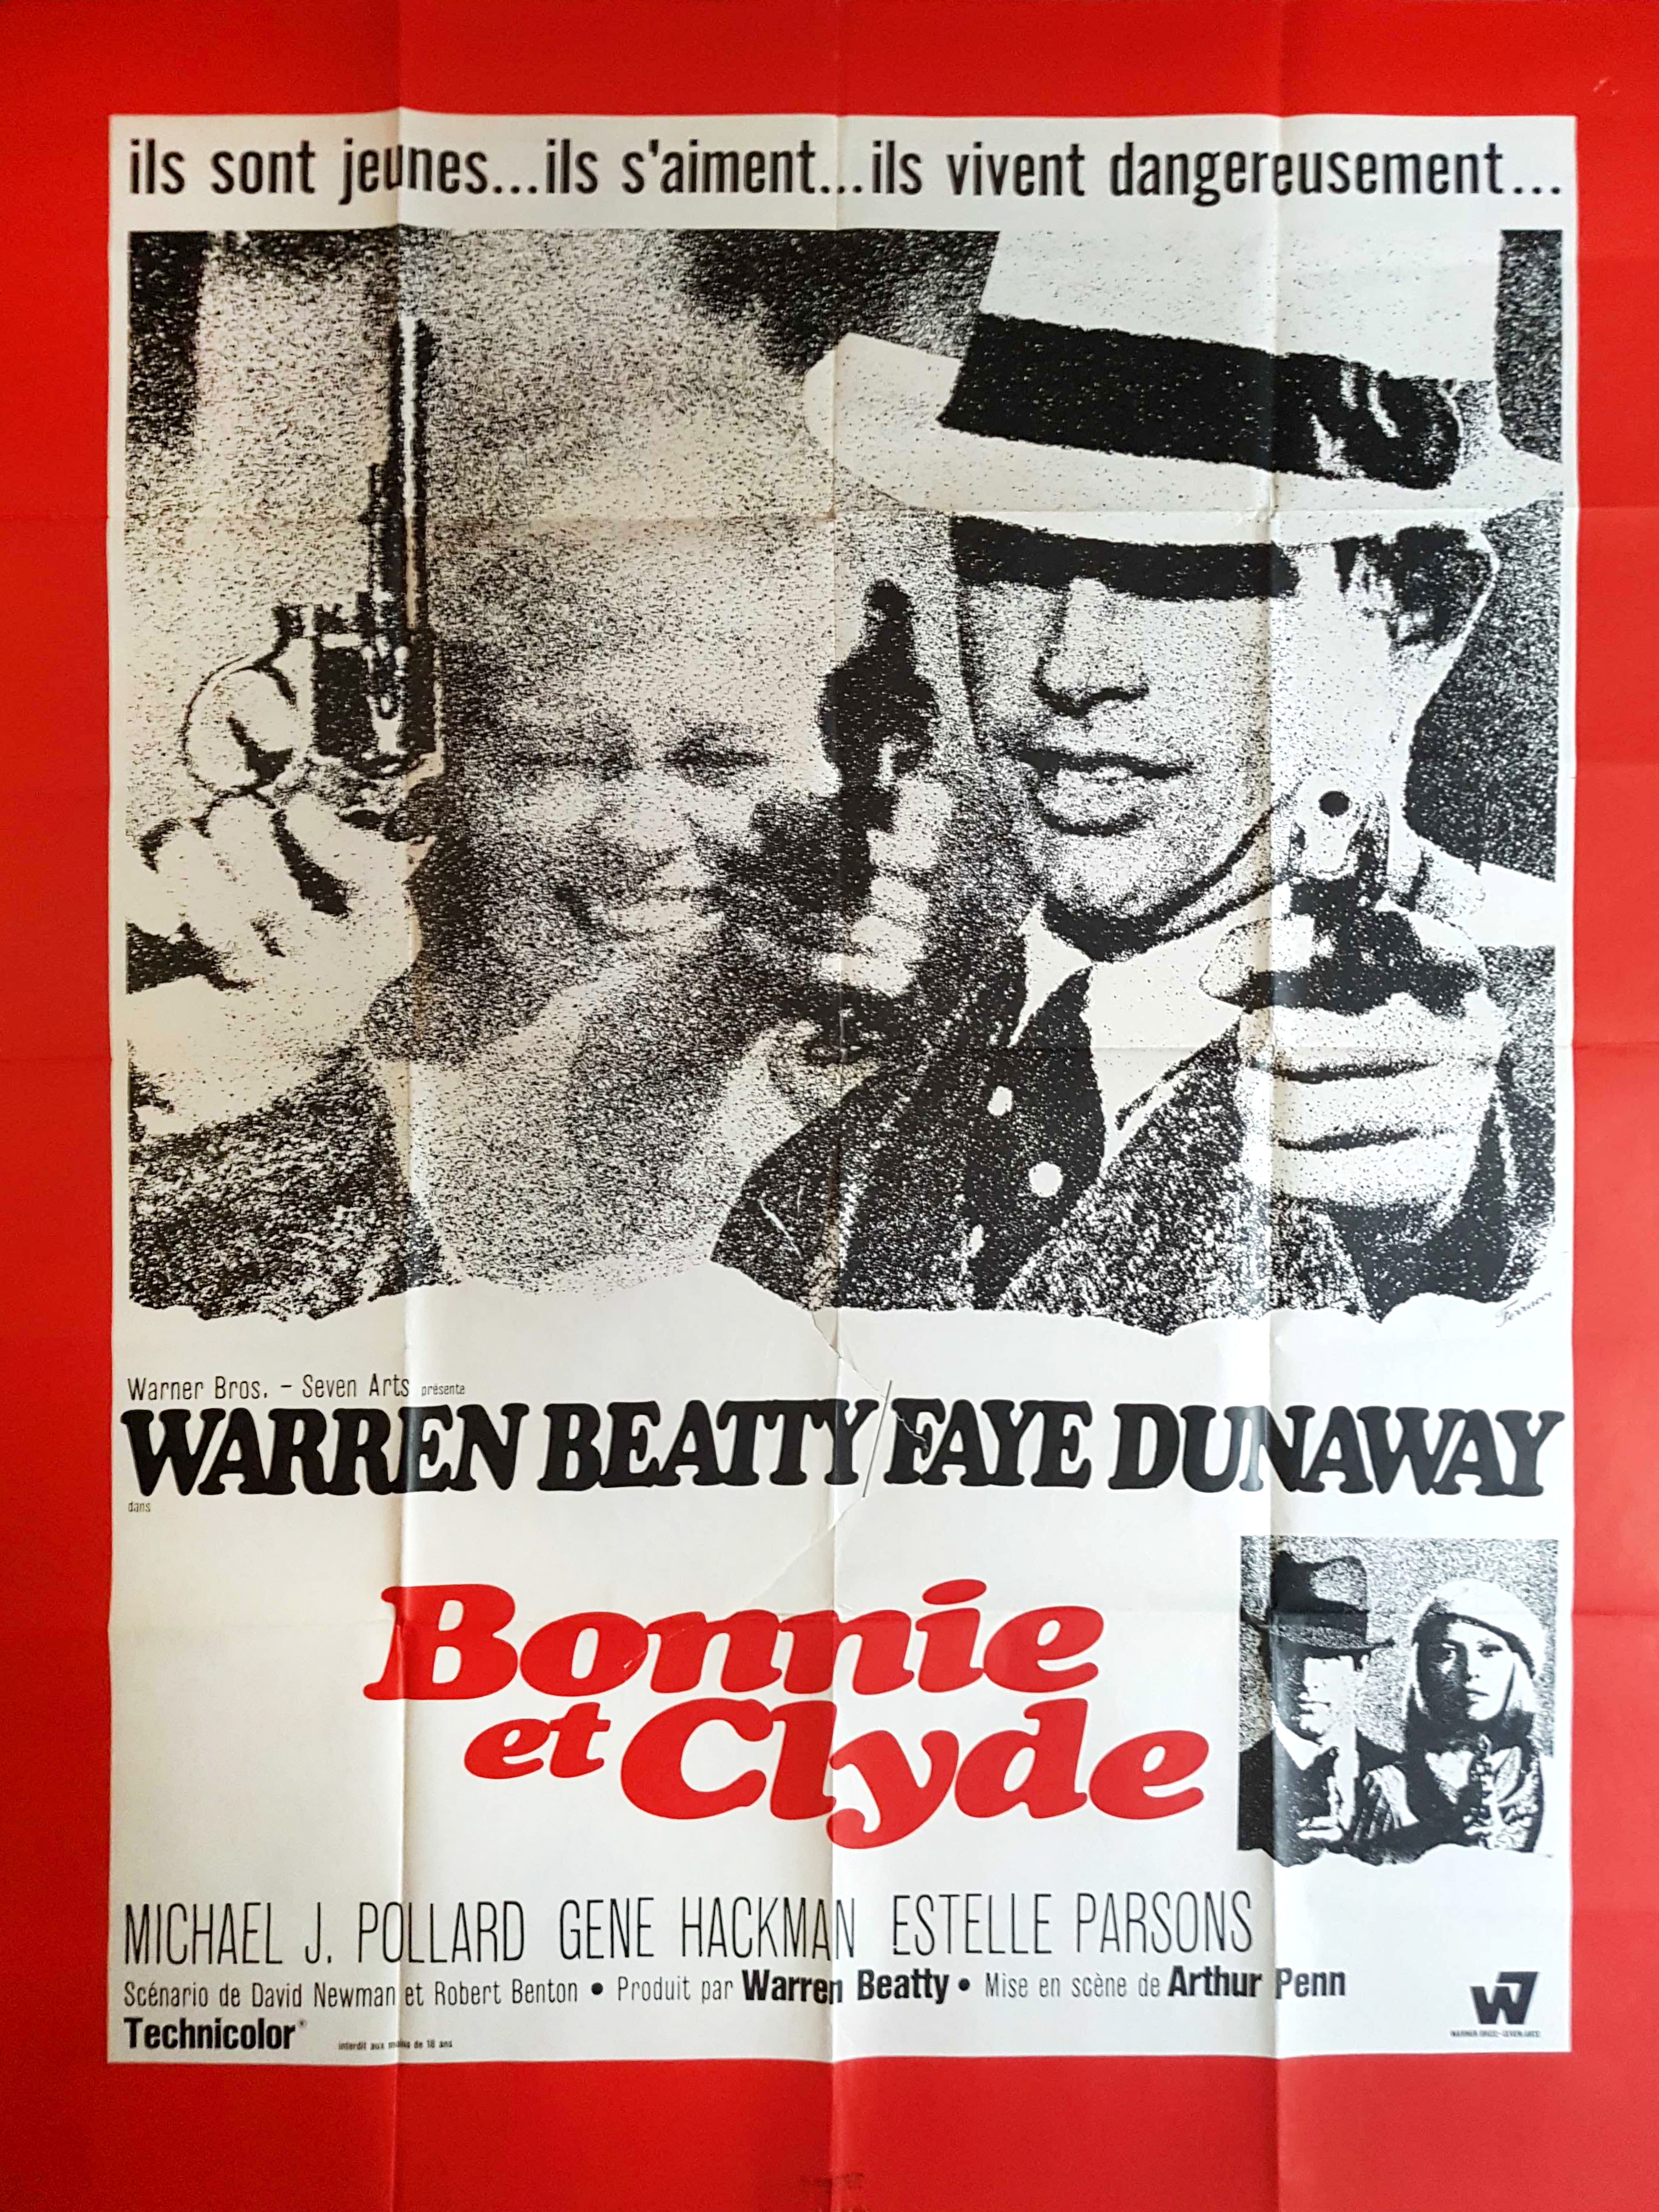 bonnie and clyde movie poster